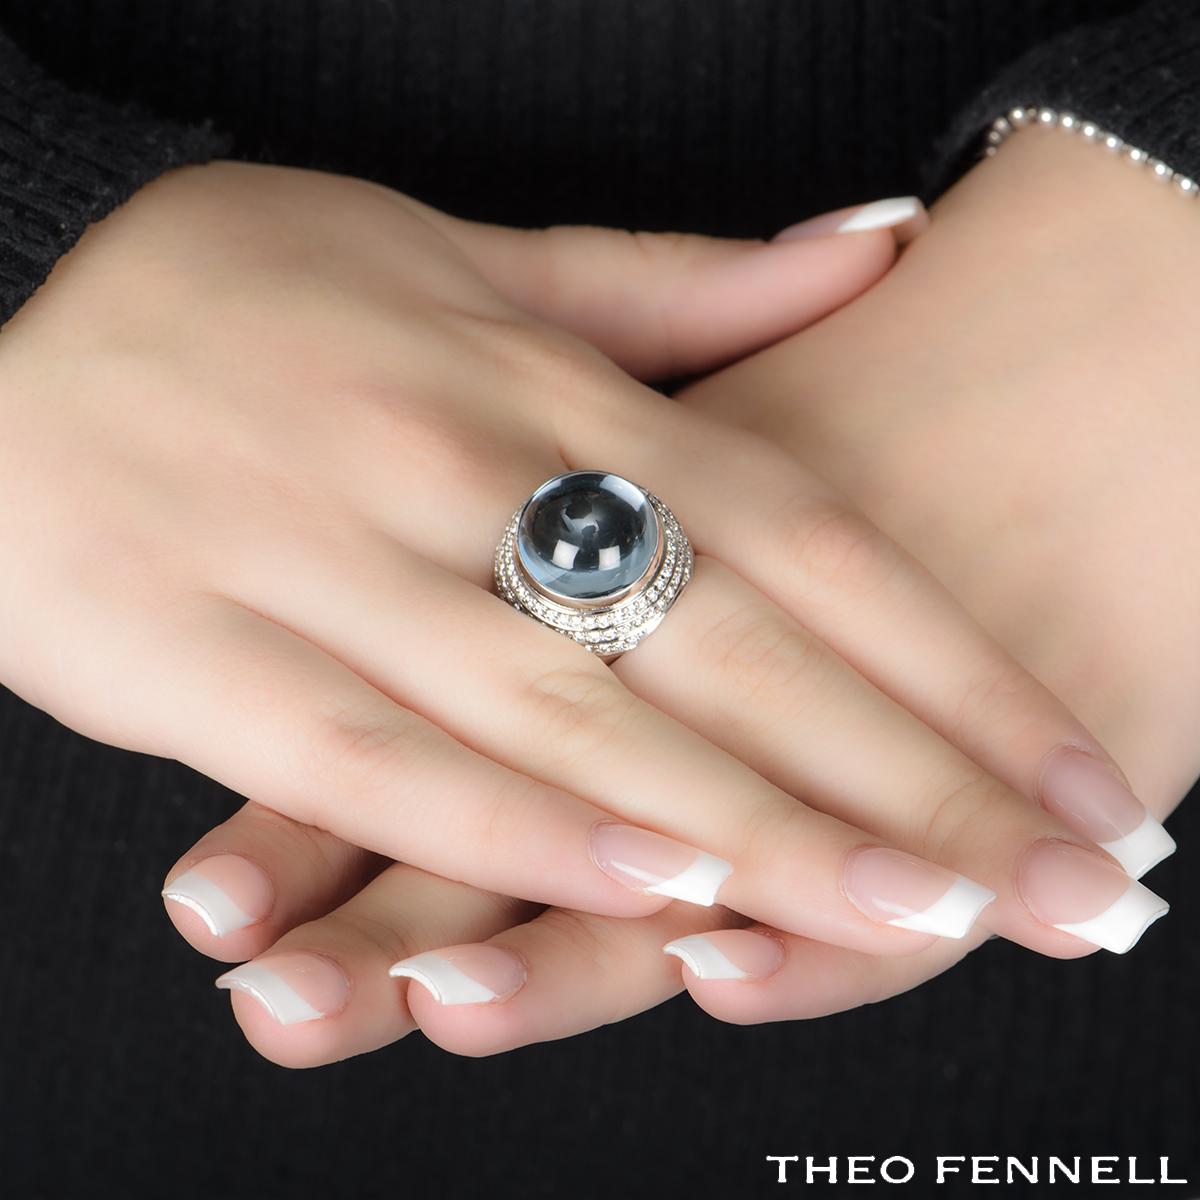 theo fennell diamond ring